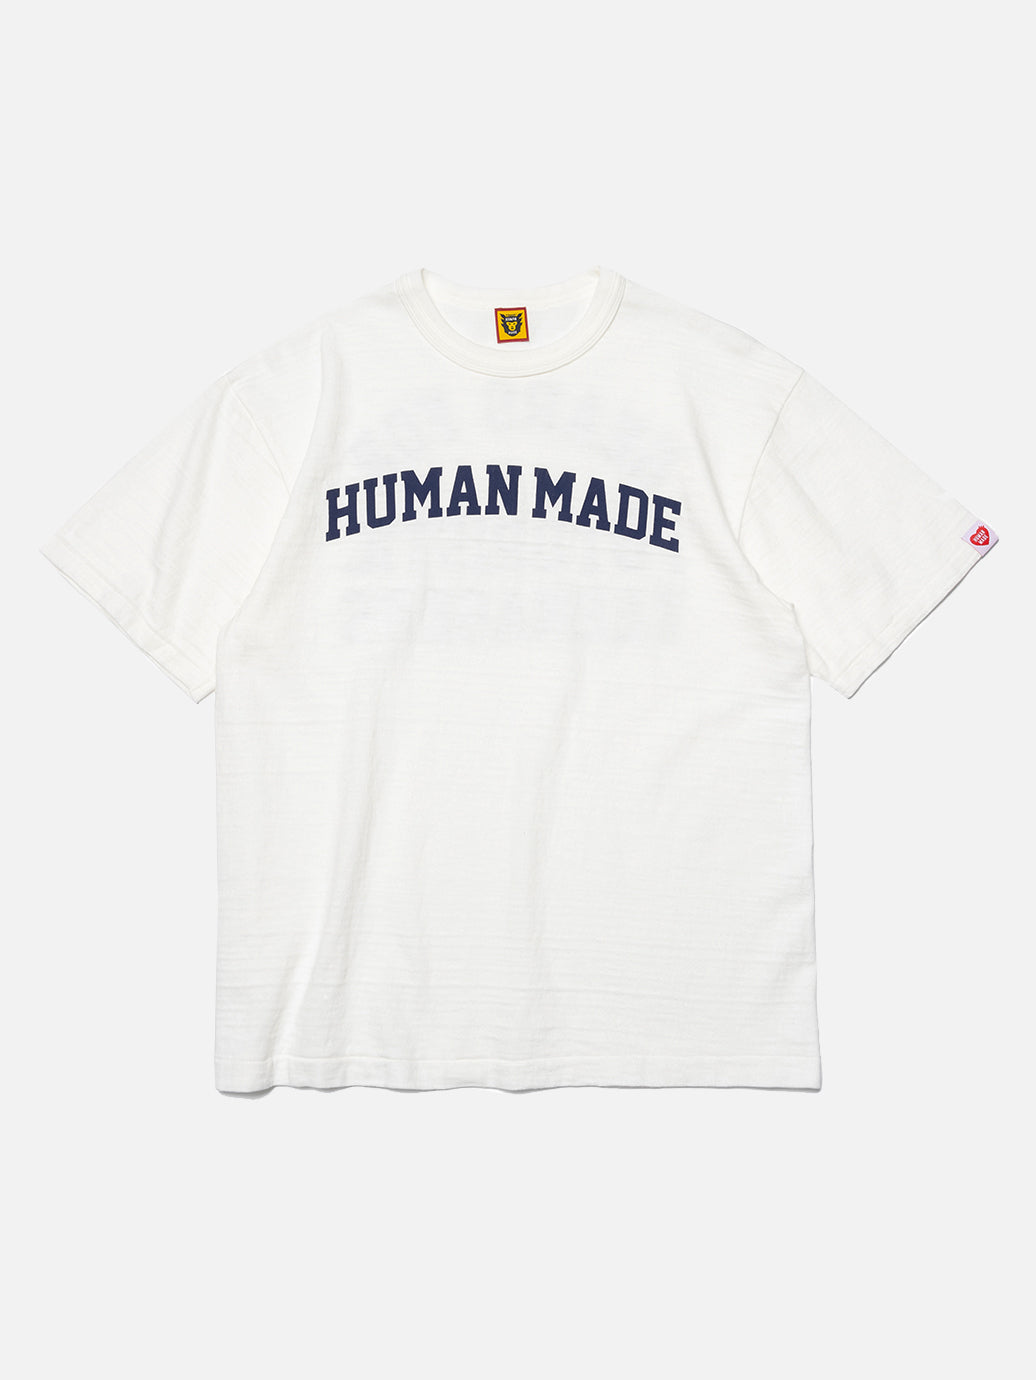 Human Made Graphic T-Shirt #06 – OALLERY